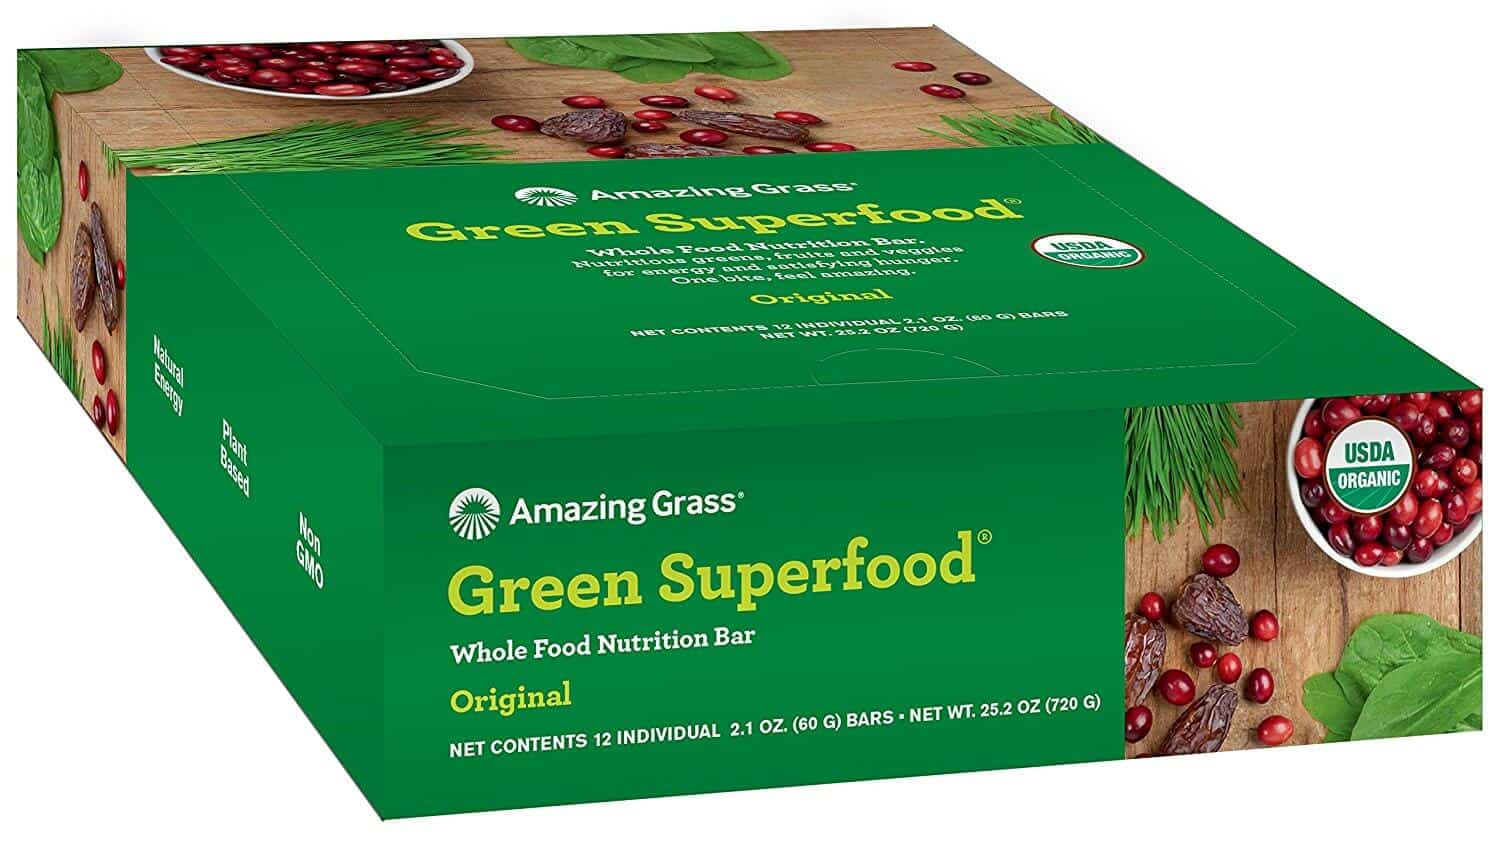 Amazing Grass Green Superfood Ingredients